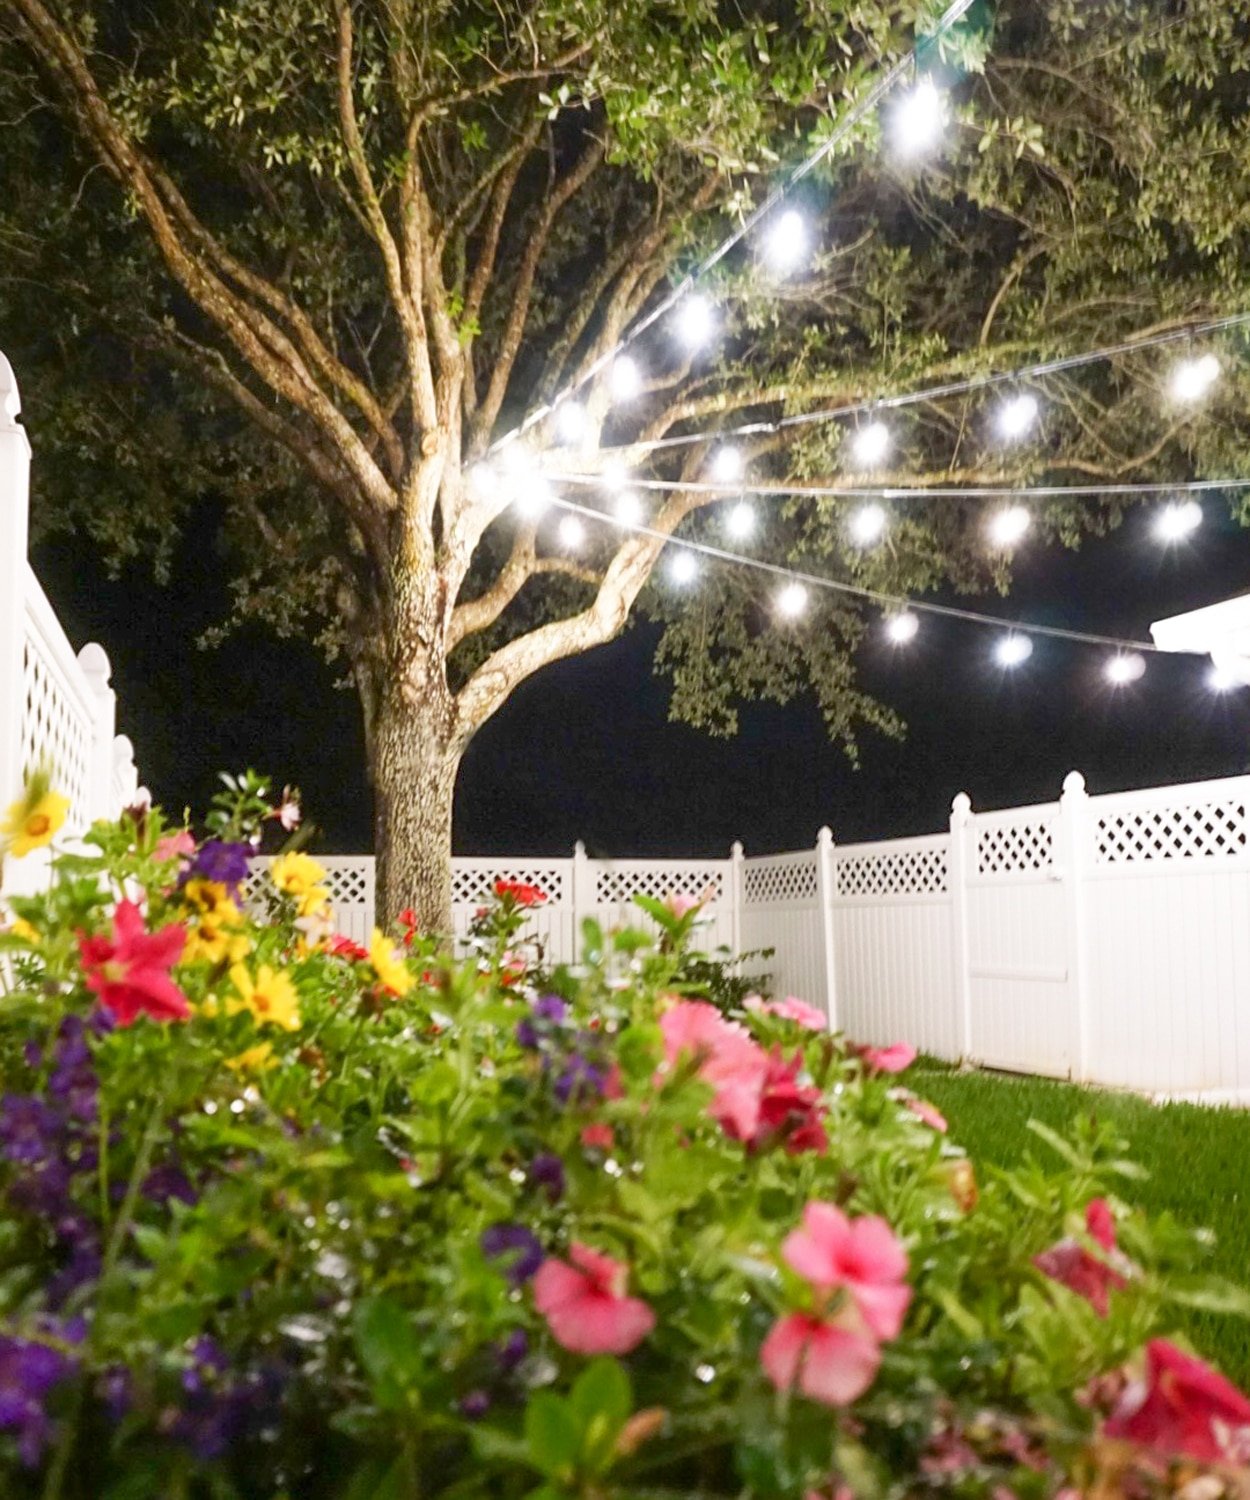 how to hang string lights outdoors